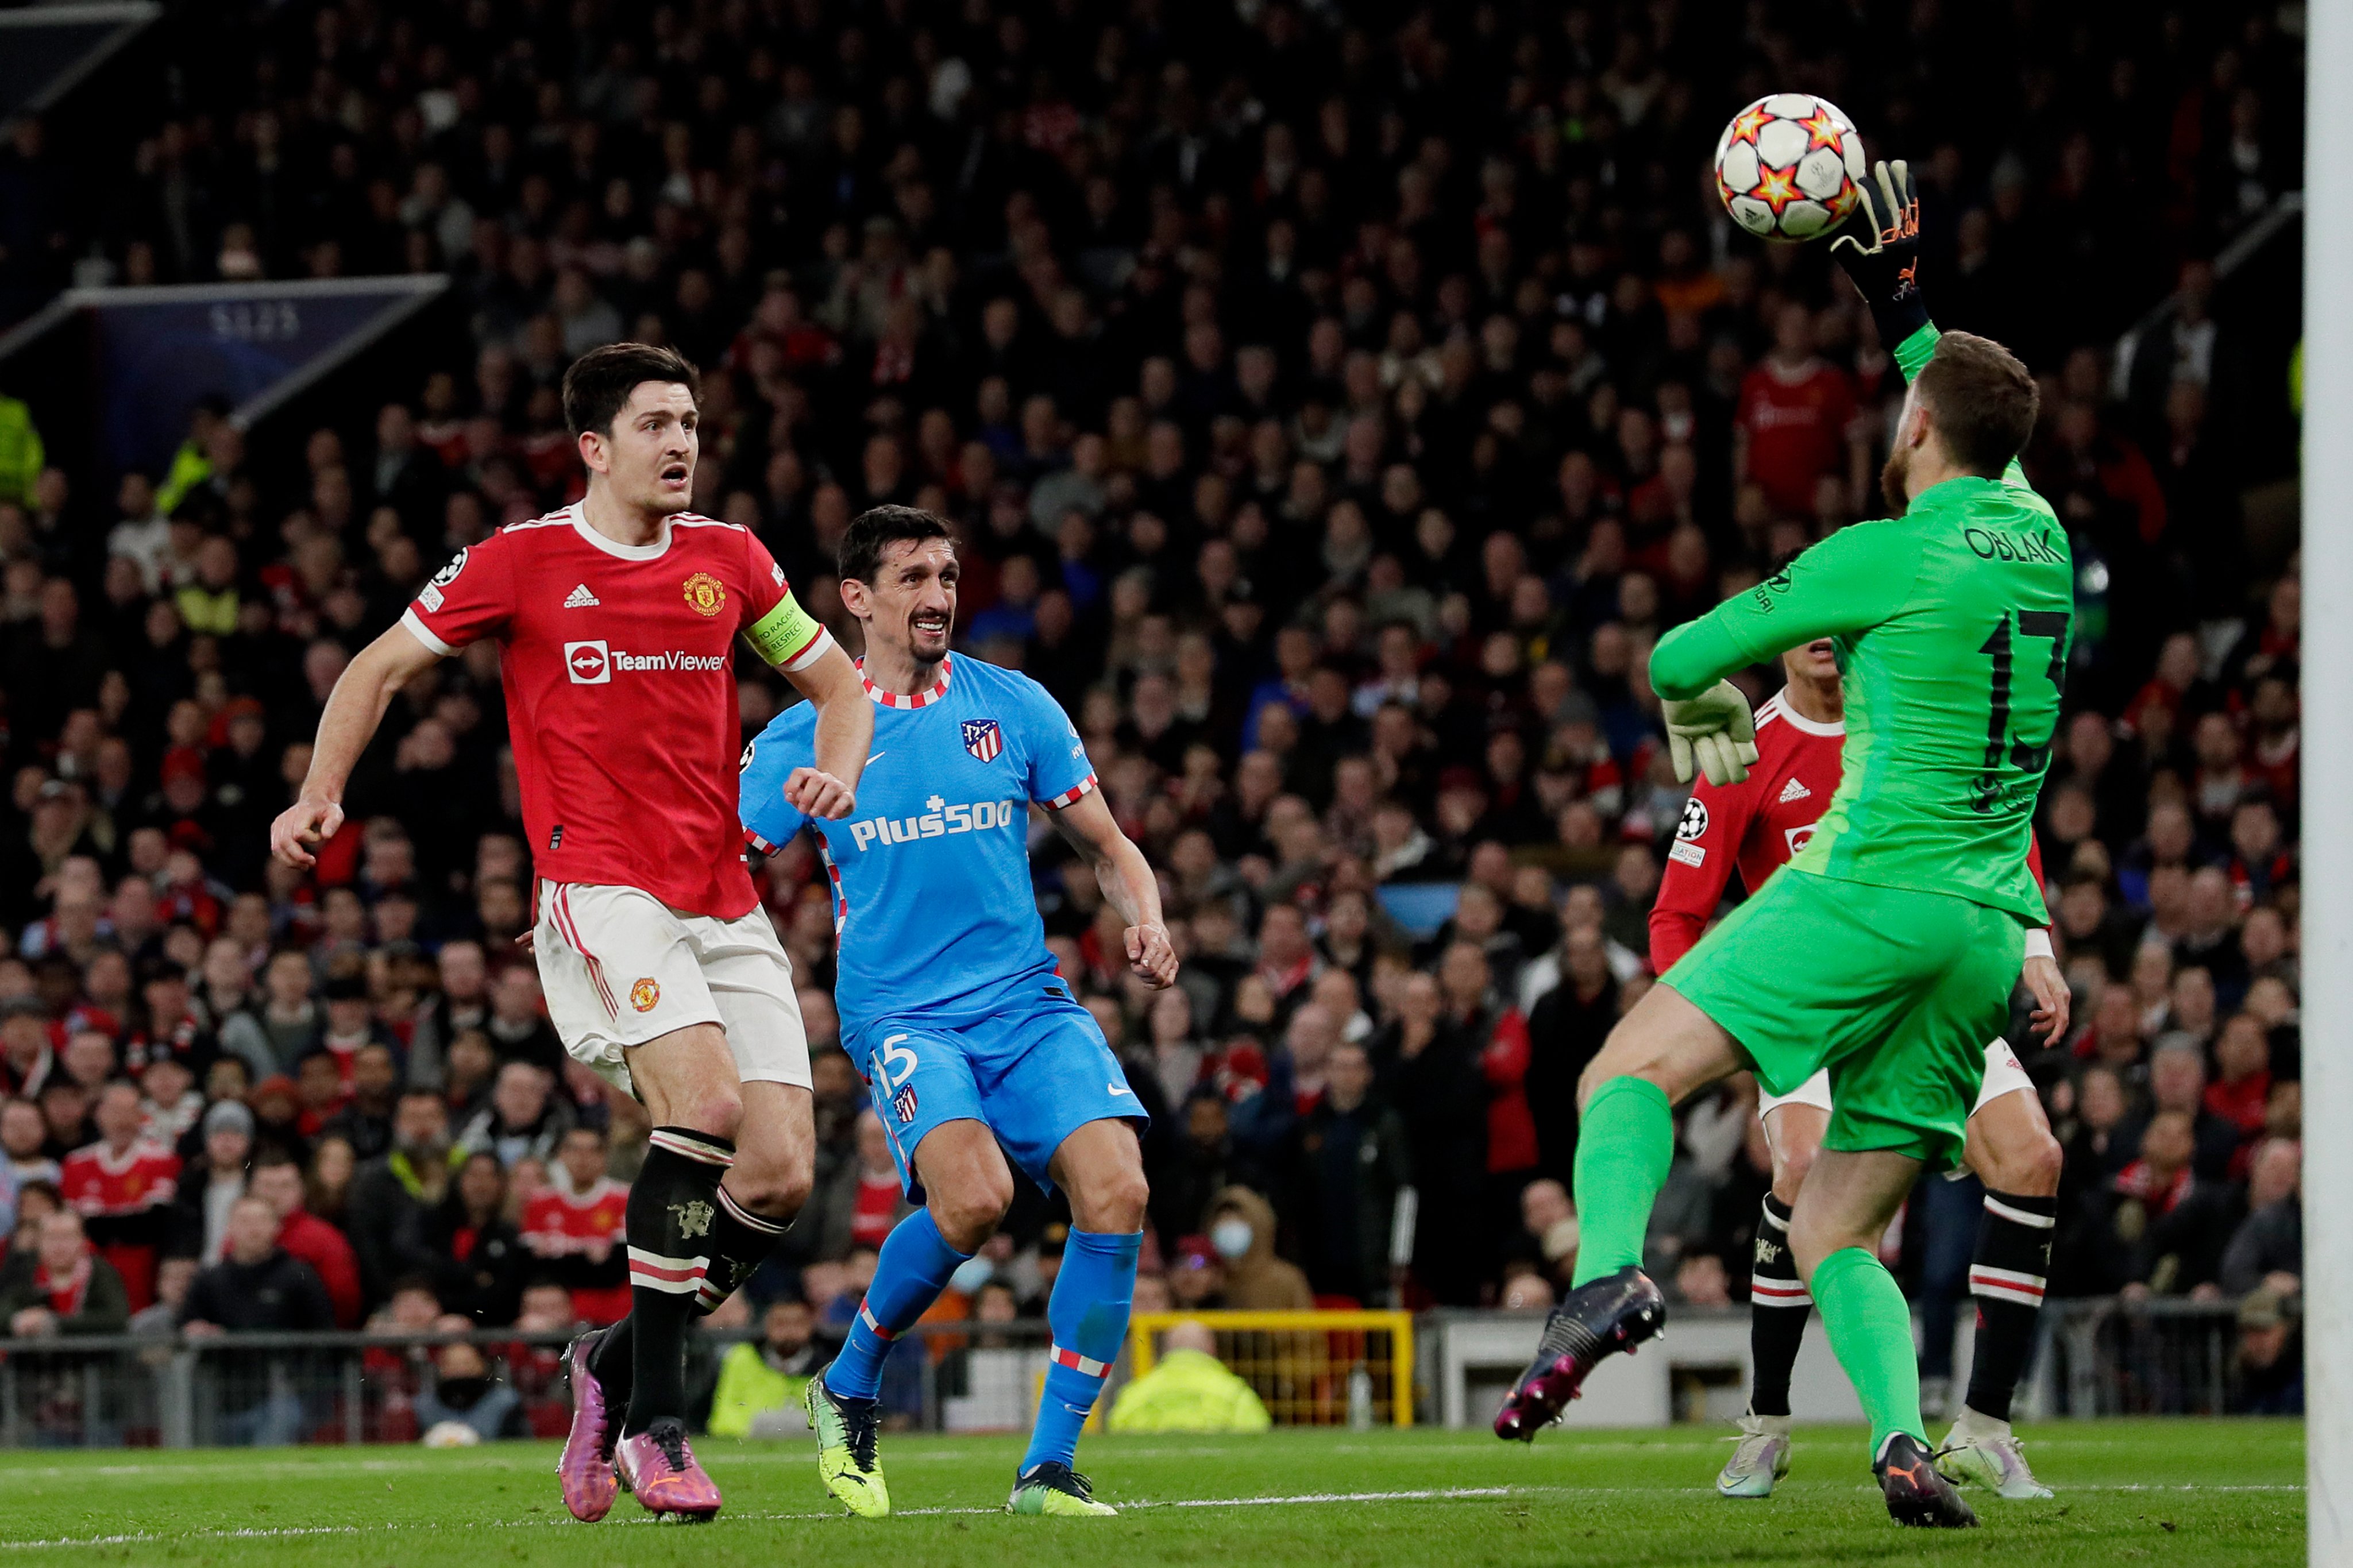 Manchester United 0-1 Atletico Madrid LIVE: Renan Lodi's first-half headed goal KNOCKS Man United out of the Champions League; Jan Oblak with a Man of the Match performance